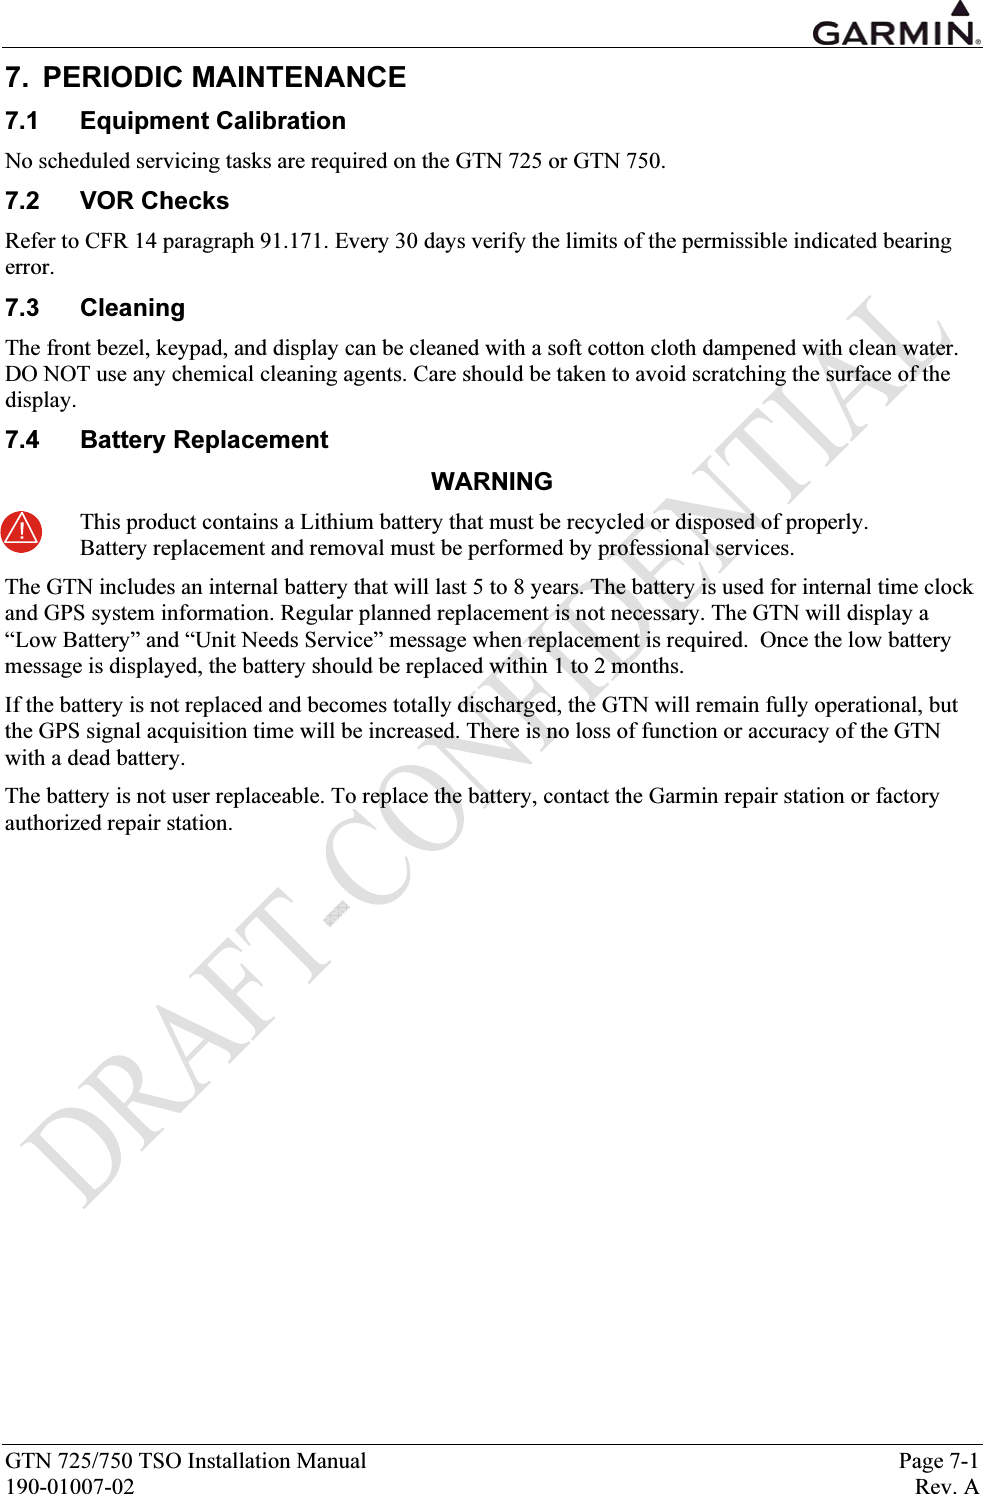  GTN 725/750 TSO Installation Manual  Page 7-1 190-01007-02  Rev. A 7. PERIODIC MAINTENANCE 7.1 Equipment Calibration No scheduled servicing tasks are required on the GTN 725 or GTN 750.  7.2 VOR Checks Refer to CFR 14 paragraph 91.171. Every 30 days verify the limits of the permissible indicated bearing error. 7.3 Cleaning The front bezel, keypad, and display can be cleaned with a soft cotton cloth dampened with clean water. DO NOT use any chemical cleaning agents. Care should be taken to avoid scratching the surface of the display.  7.4 Battery Replacement WARNING This product contains a Lithium battery that must be recycled or disposed of properly. Battery replacement and removal must be performed by professional services.  The GTN includes an internal battery that will last 5 to 8 years. The battery is used for internal time clock and GPS system information. Regular planned replacement is not necessary. The GTN will display a “Low Battery” and “Unit Needs Service” message when replacement is required.  Once the low battery message is displayed, the battery should be replaced within 1 to 2 months.  If the battery is not replaced and becomes totally discharged, the GTN will remain fully operational, but the GPS signal acquisition time will be increased. There is no loss of function or accuracy of the GTN with a dead battery.  The battery is not user replaceable. To replace the battery, contact the Garmin repair station or factory authorized repair station.  